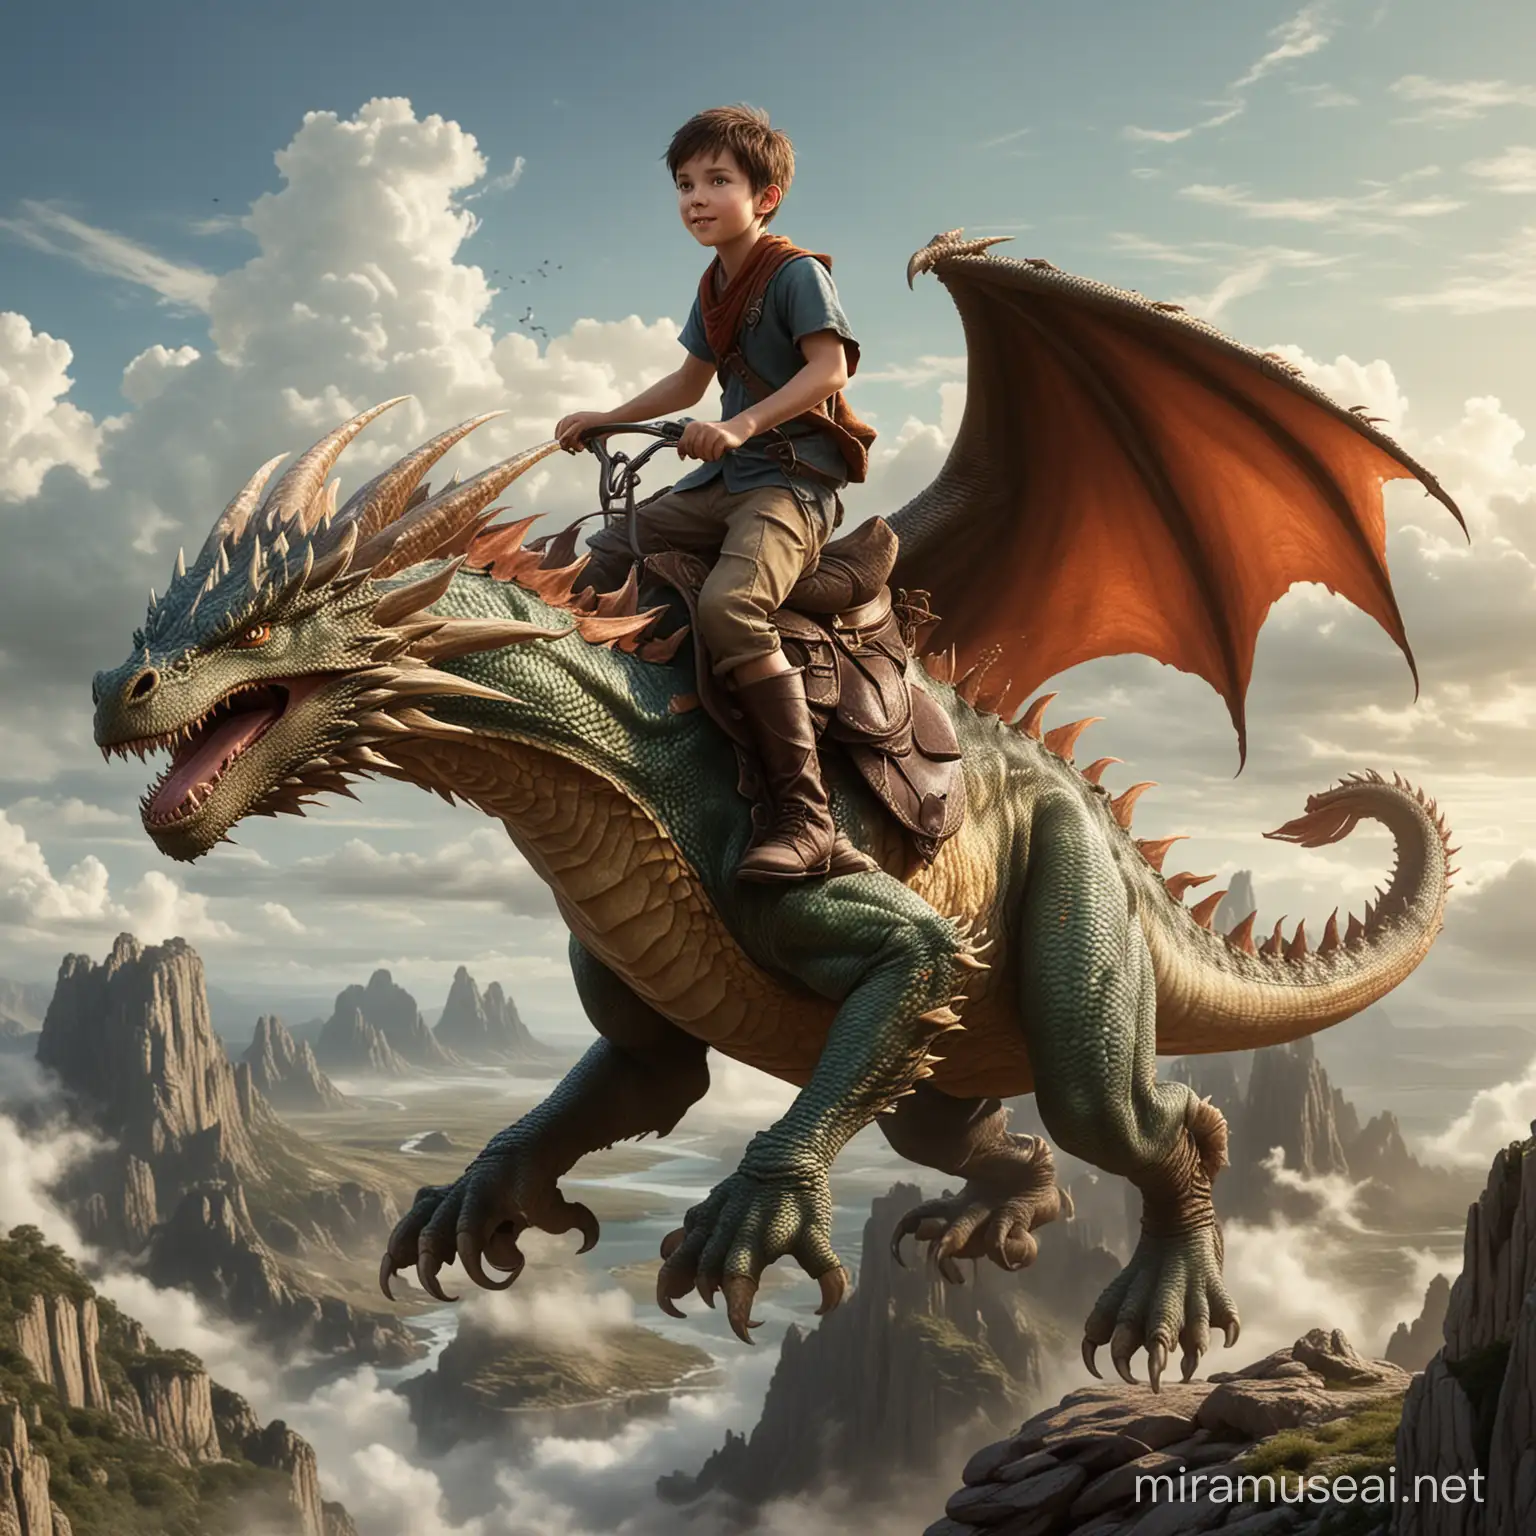 Adventurous Boy Riding a Majestic Dragon in Realistic Style